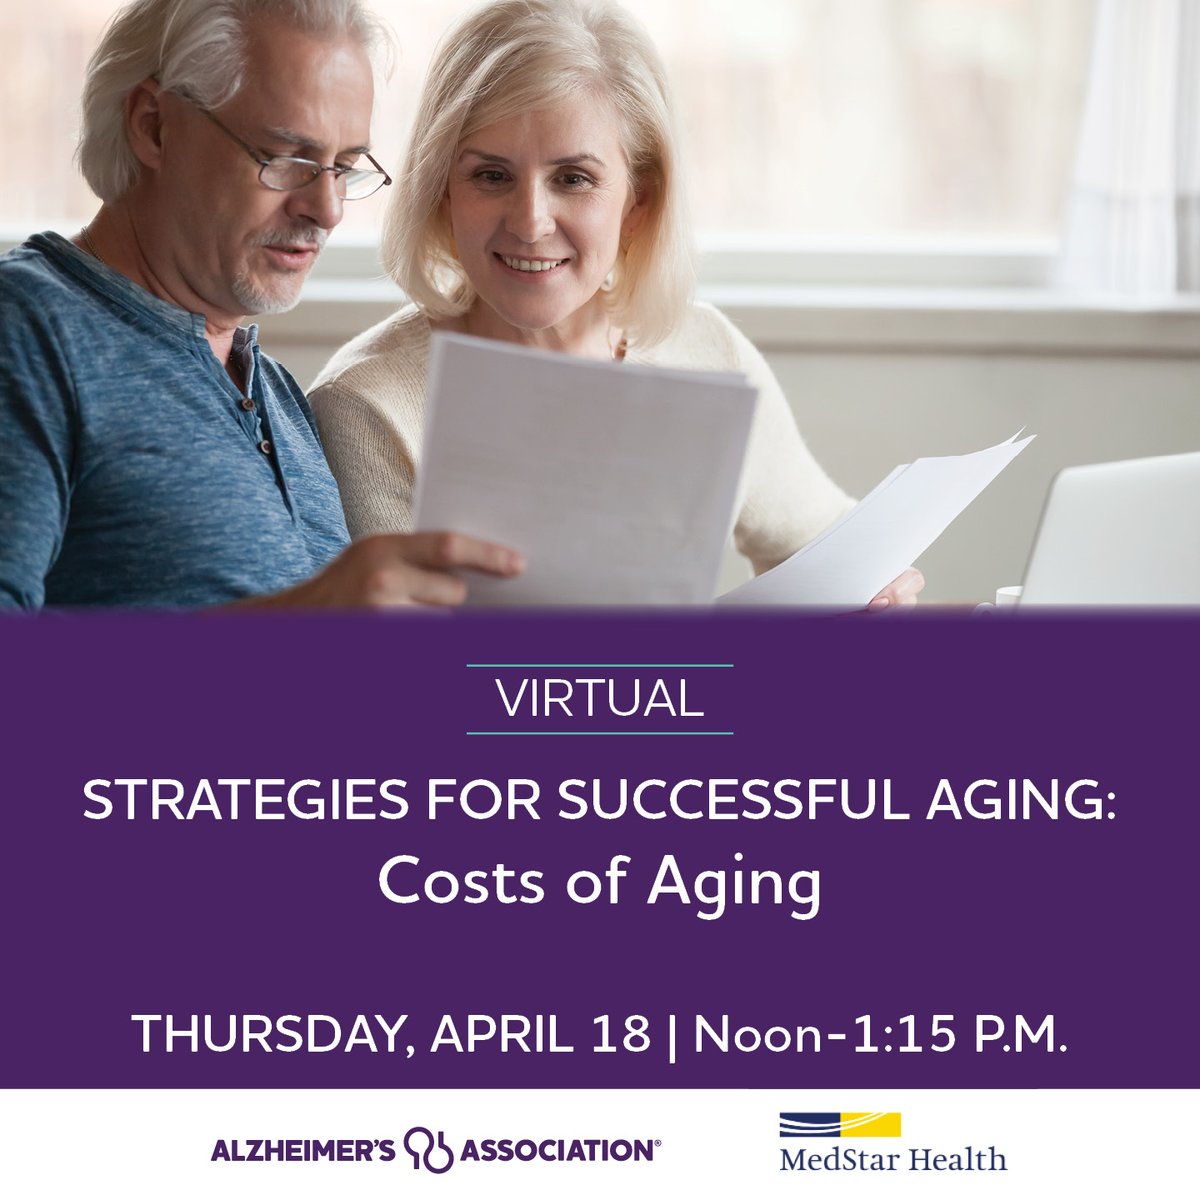 Join the Chapter and @MedStarHealth on Apr. 18 at Noon for a free virtual program on the costs of aging. Learn how to prepare for future care costs, prevent fraud and scams, and the benefits of early planning. Register to receive login instructions. ow.ly/ujfF50Rf6iN